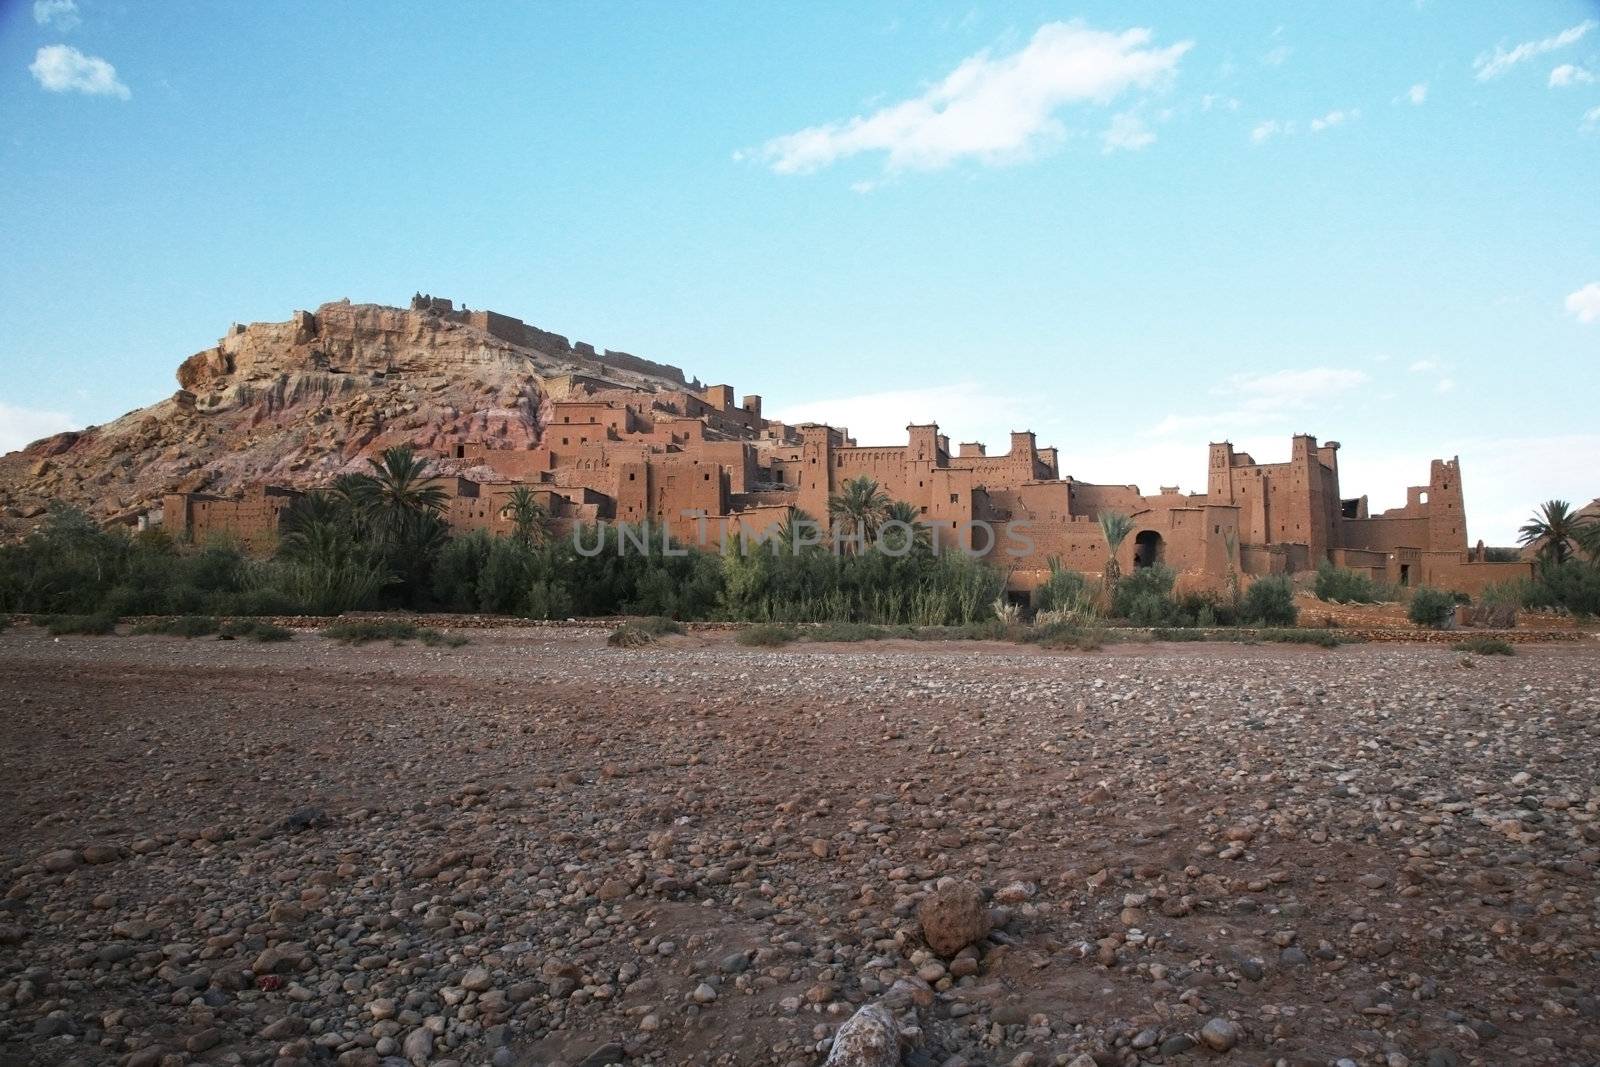 general view of kasbah ait benhaddou in morocco